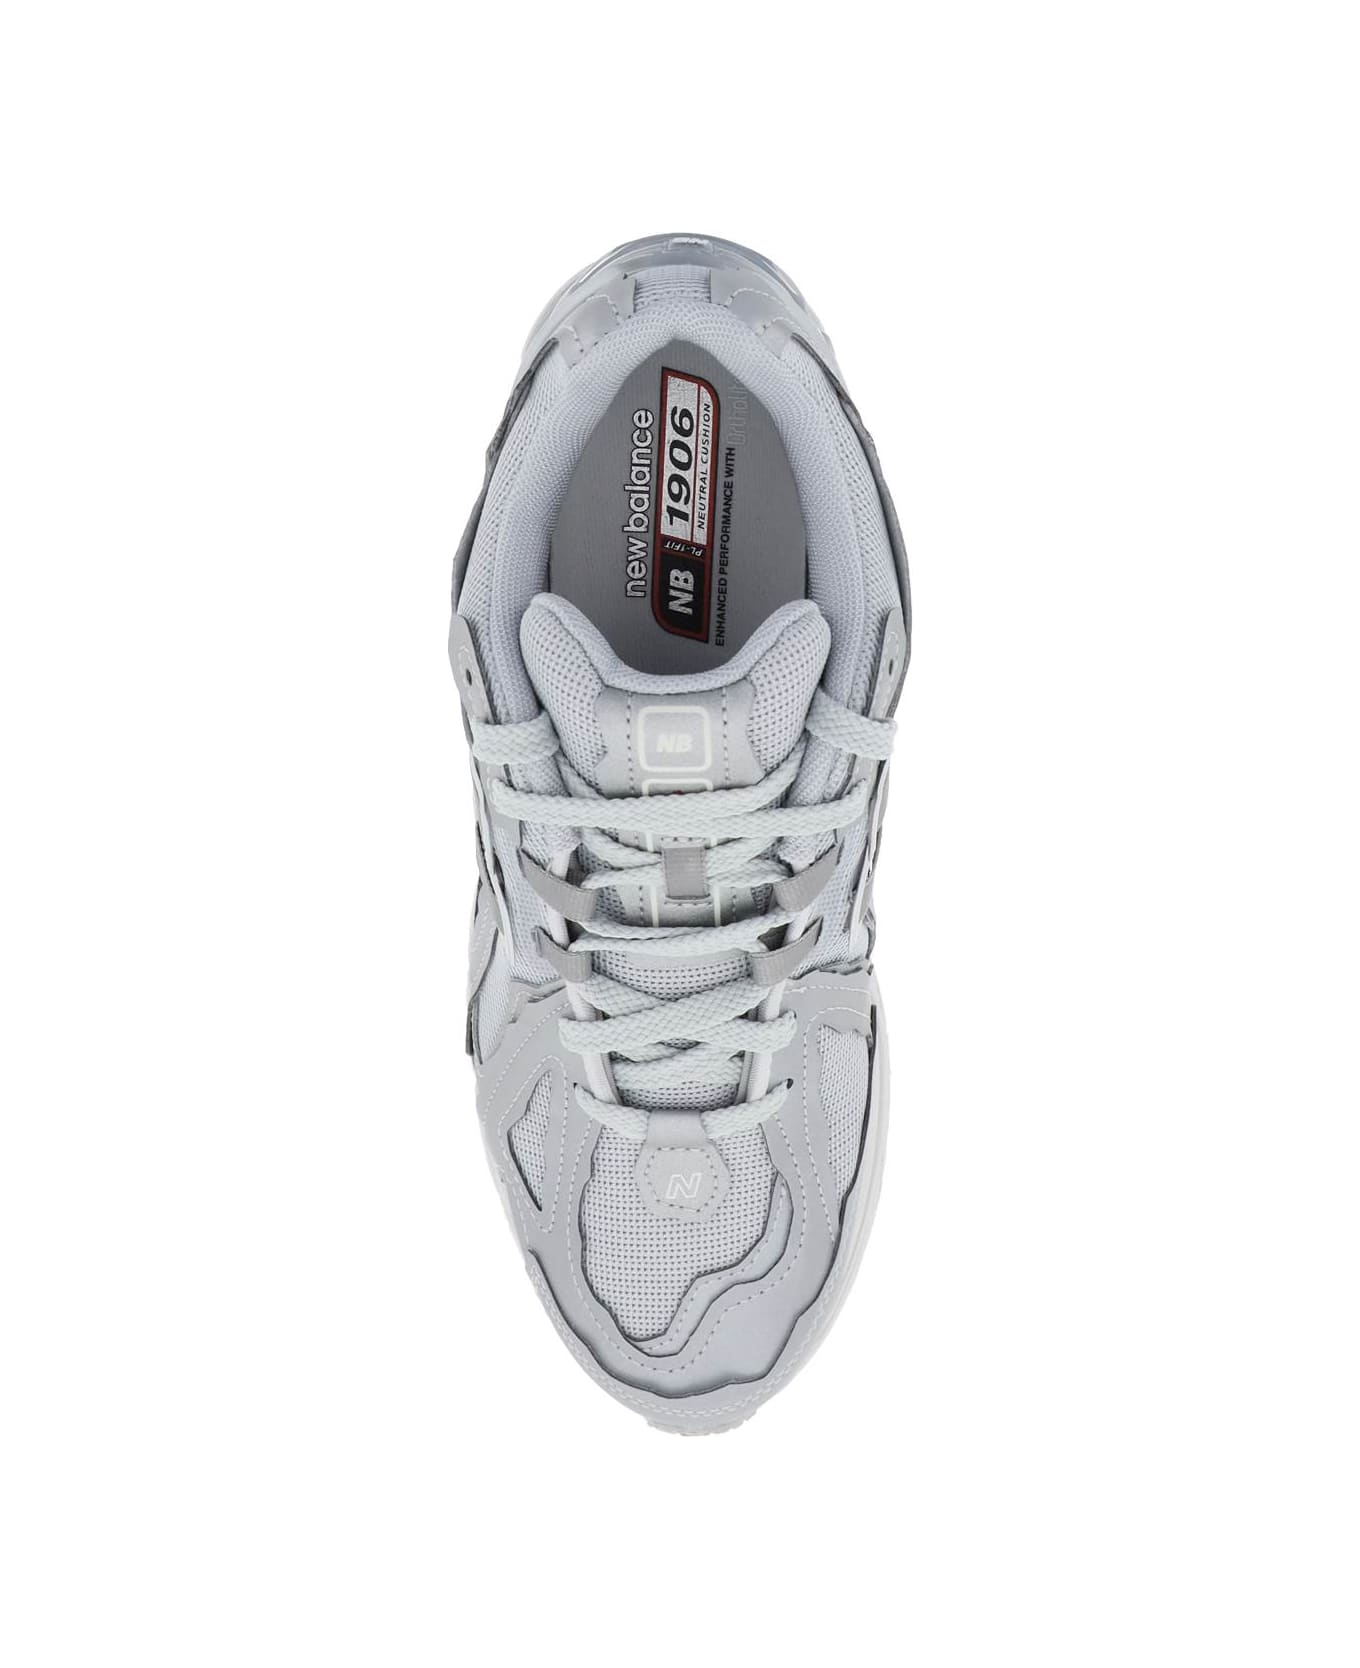 New Balance 1906dh Sneakers - SILVER METALLIC (Silver) スニーカー